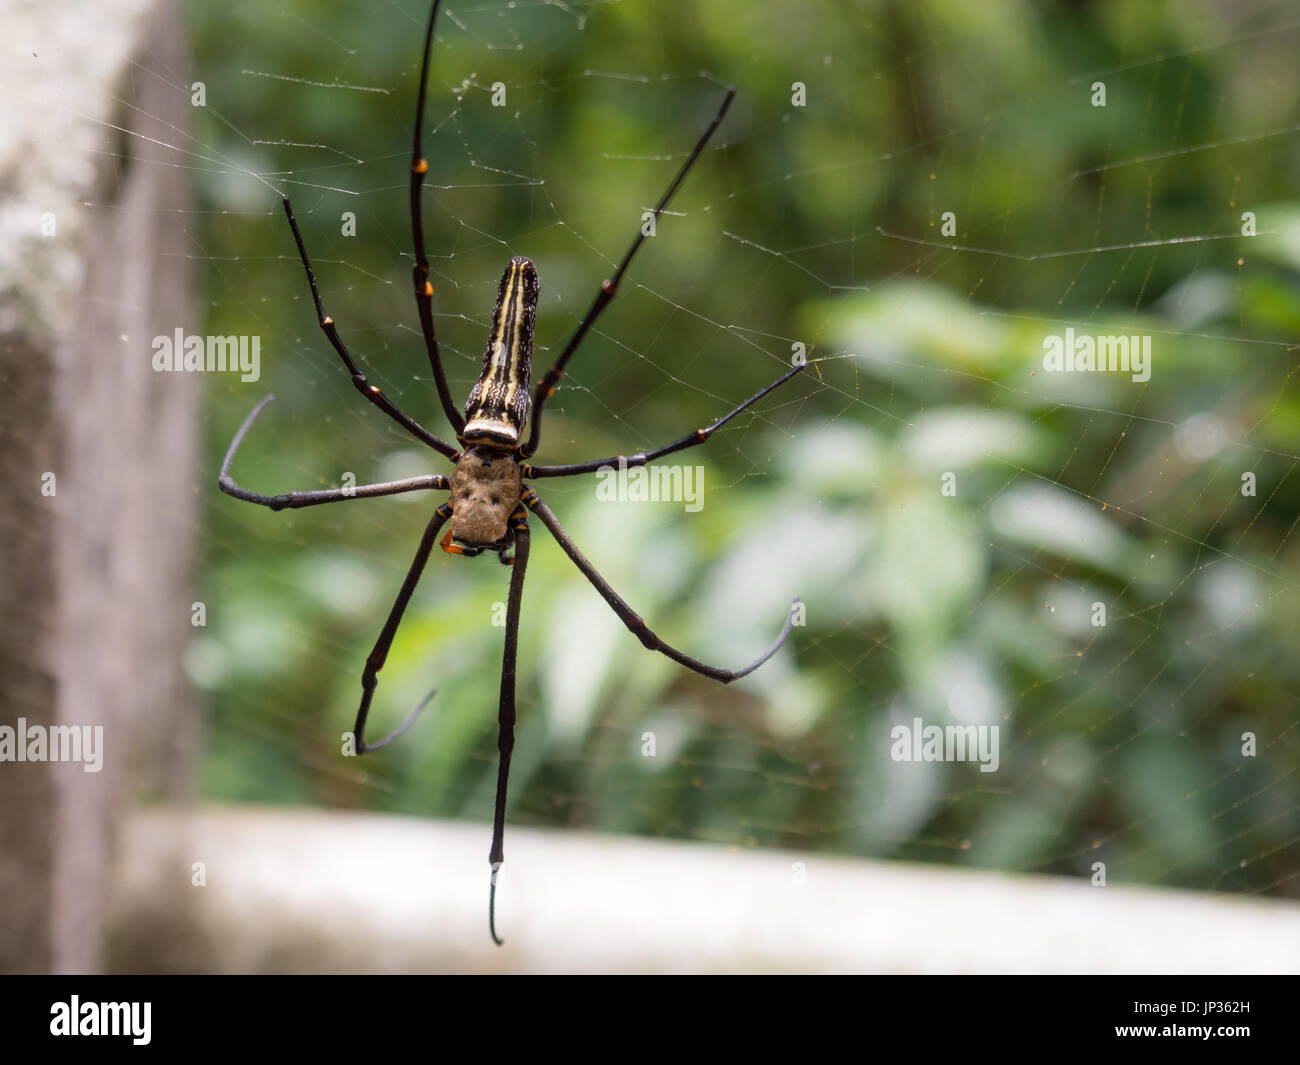 A huge spider on the spider web in Taiwan. Stock Photo